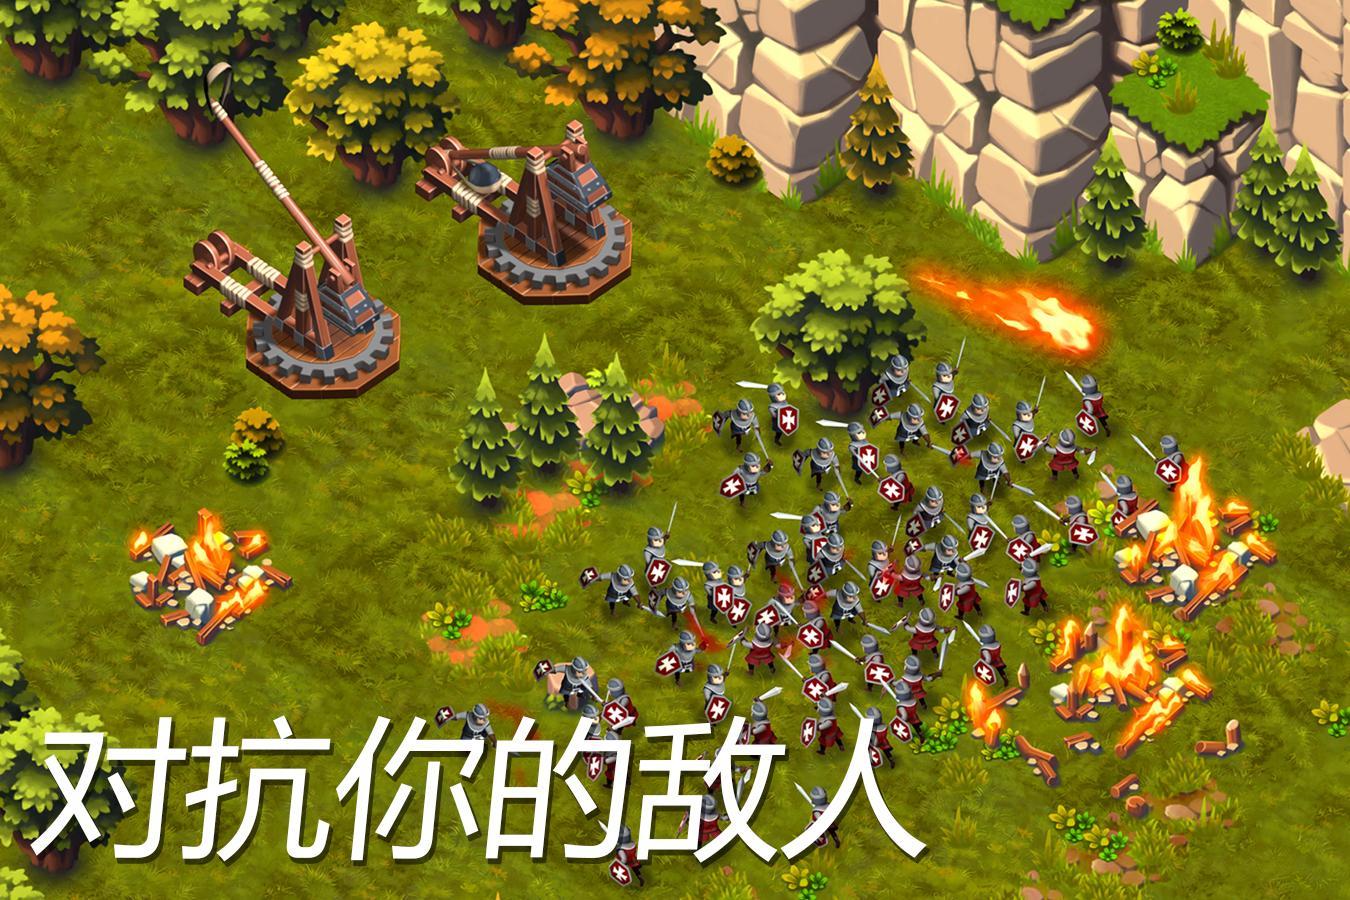 Screenshot 1 of Lords & Castles - RTS MMO 게임 1.81